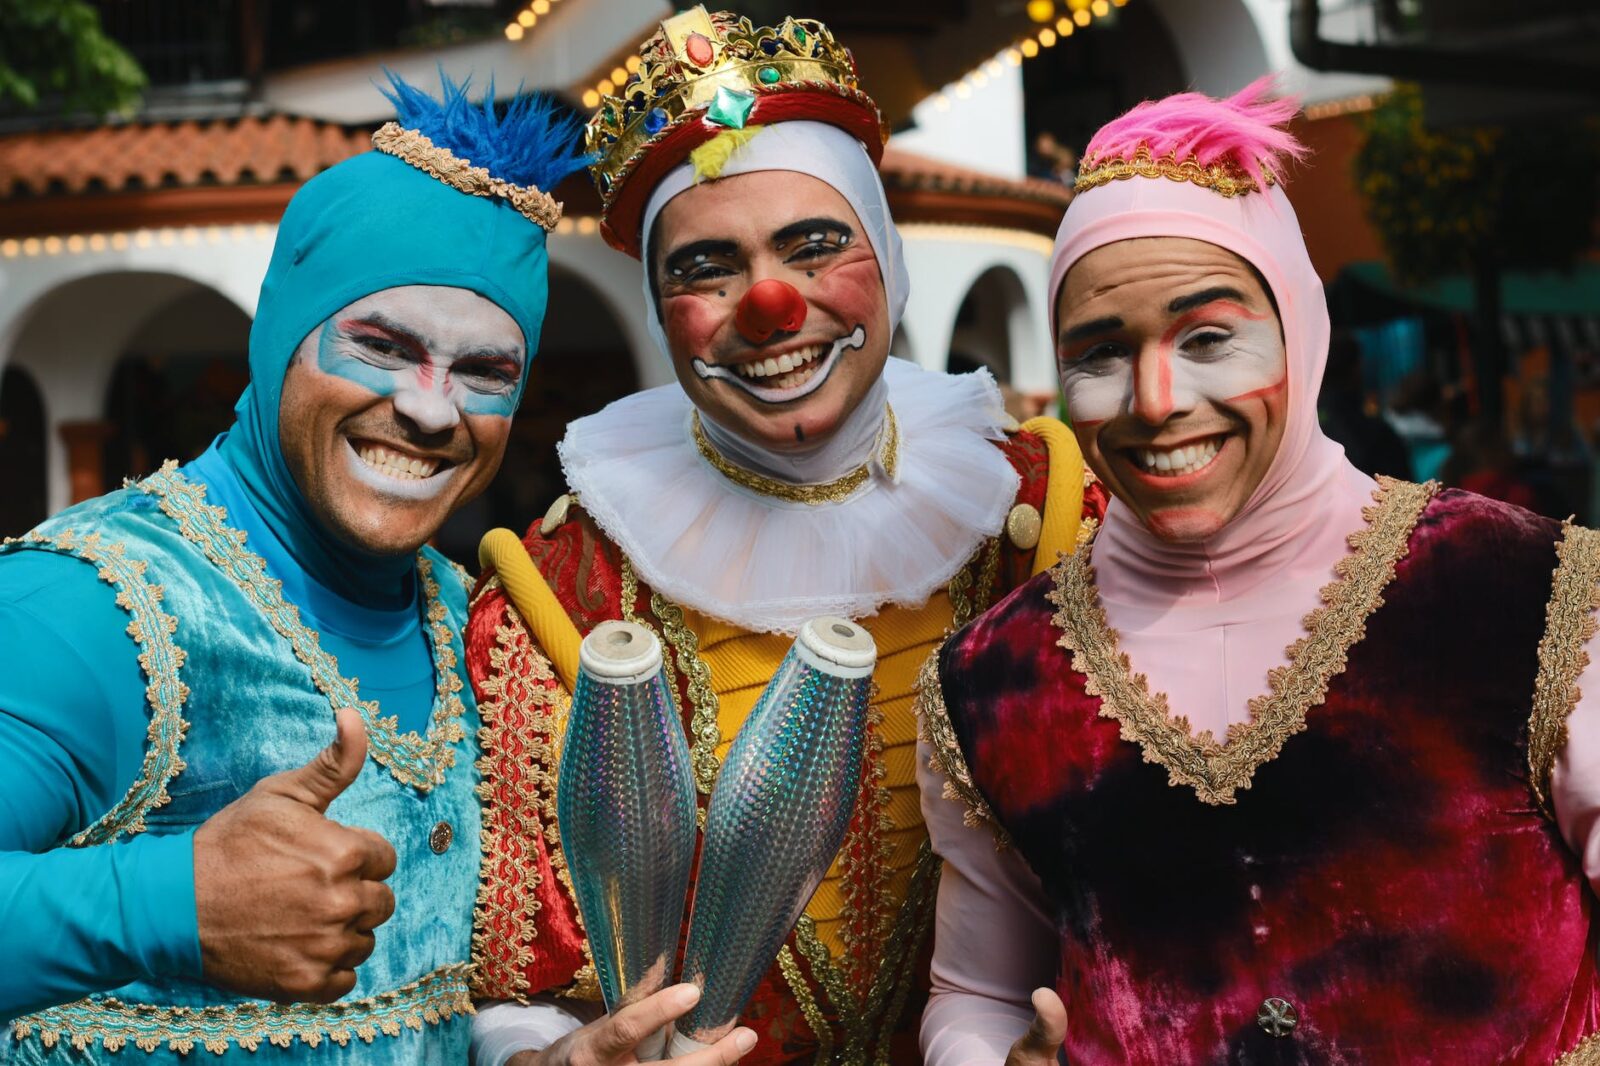 New Computing Approach May Save At-Risk Carnival Costume Making Tradition